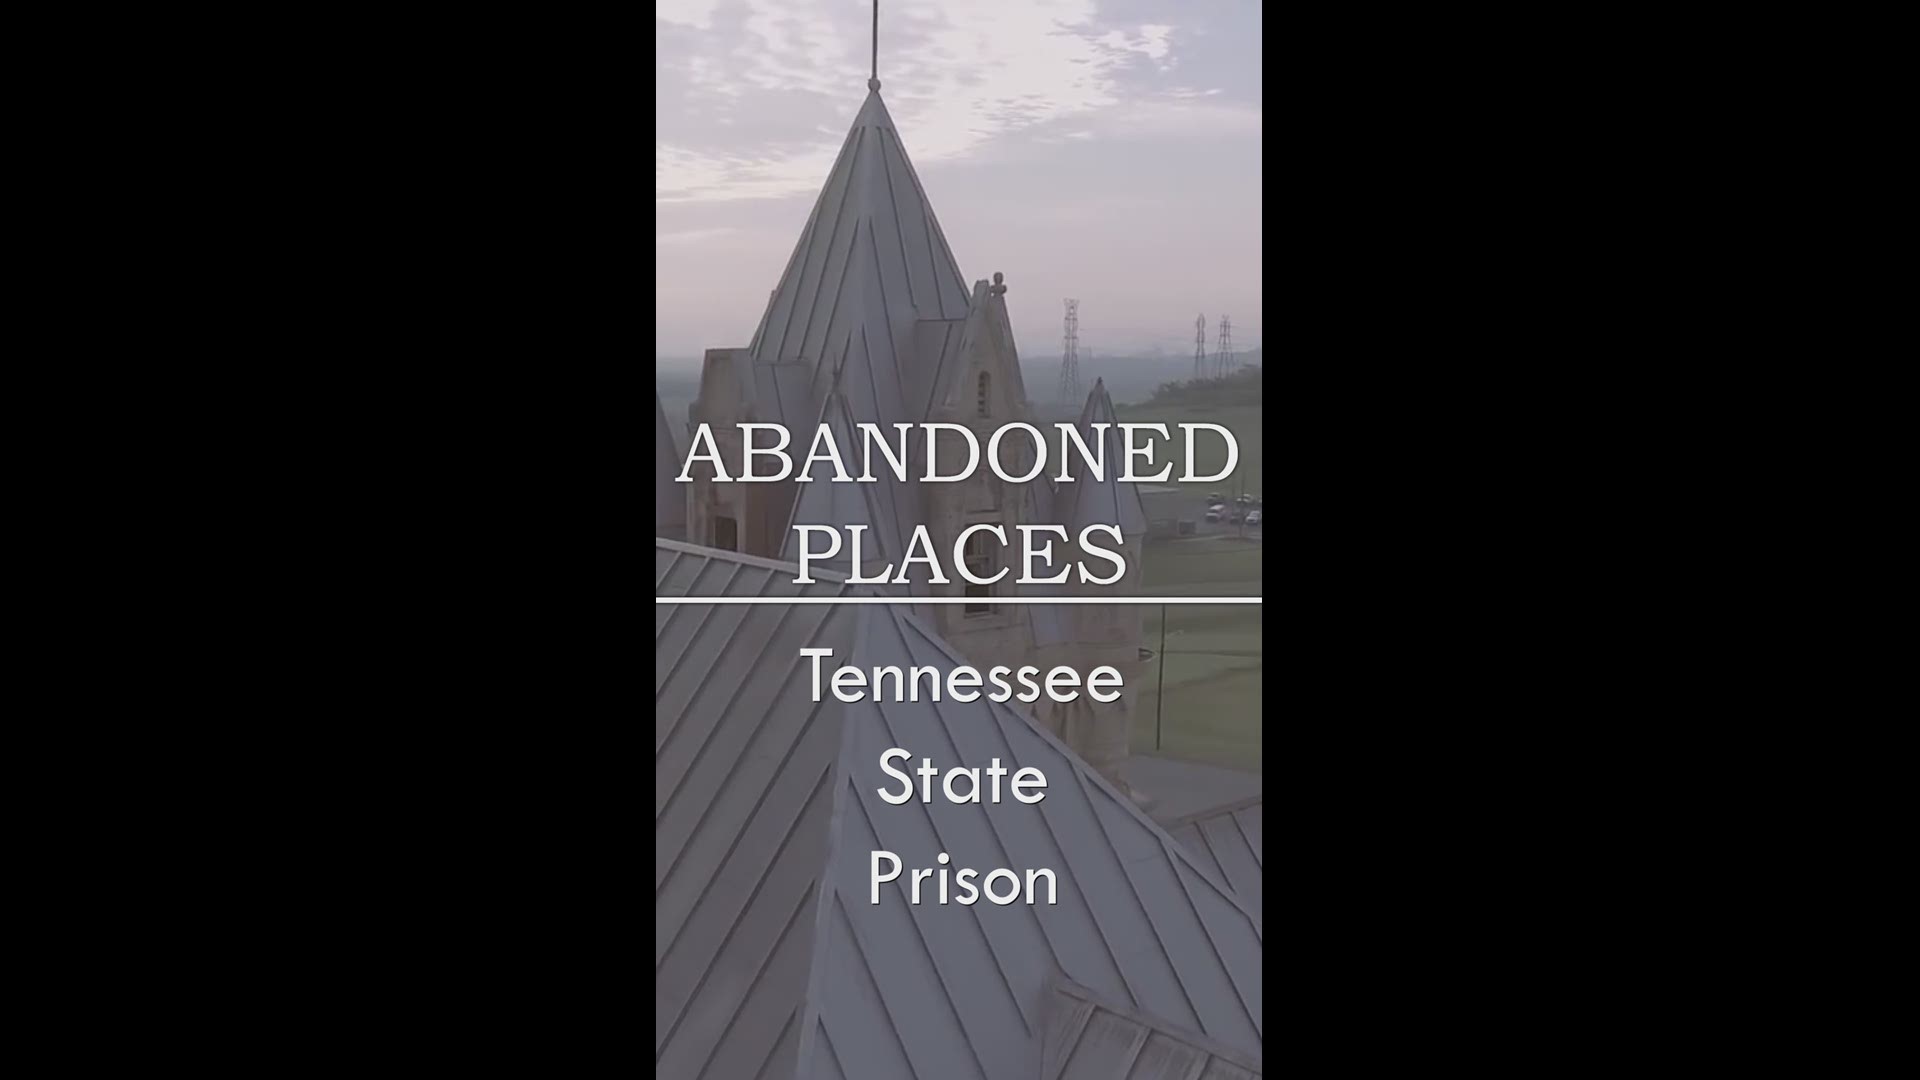 Join WBIR for our digital-first series, Abandoned Places. Our first stop is the Tennessee State Prison, just outside of Nashville.